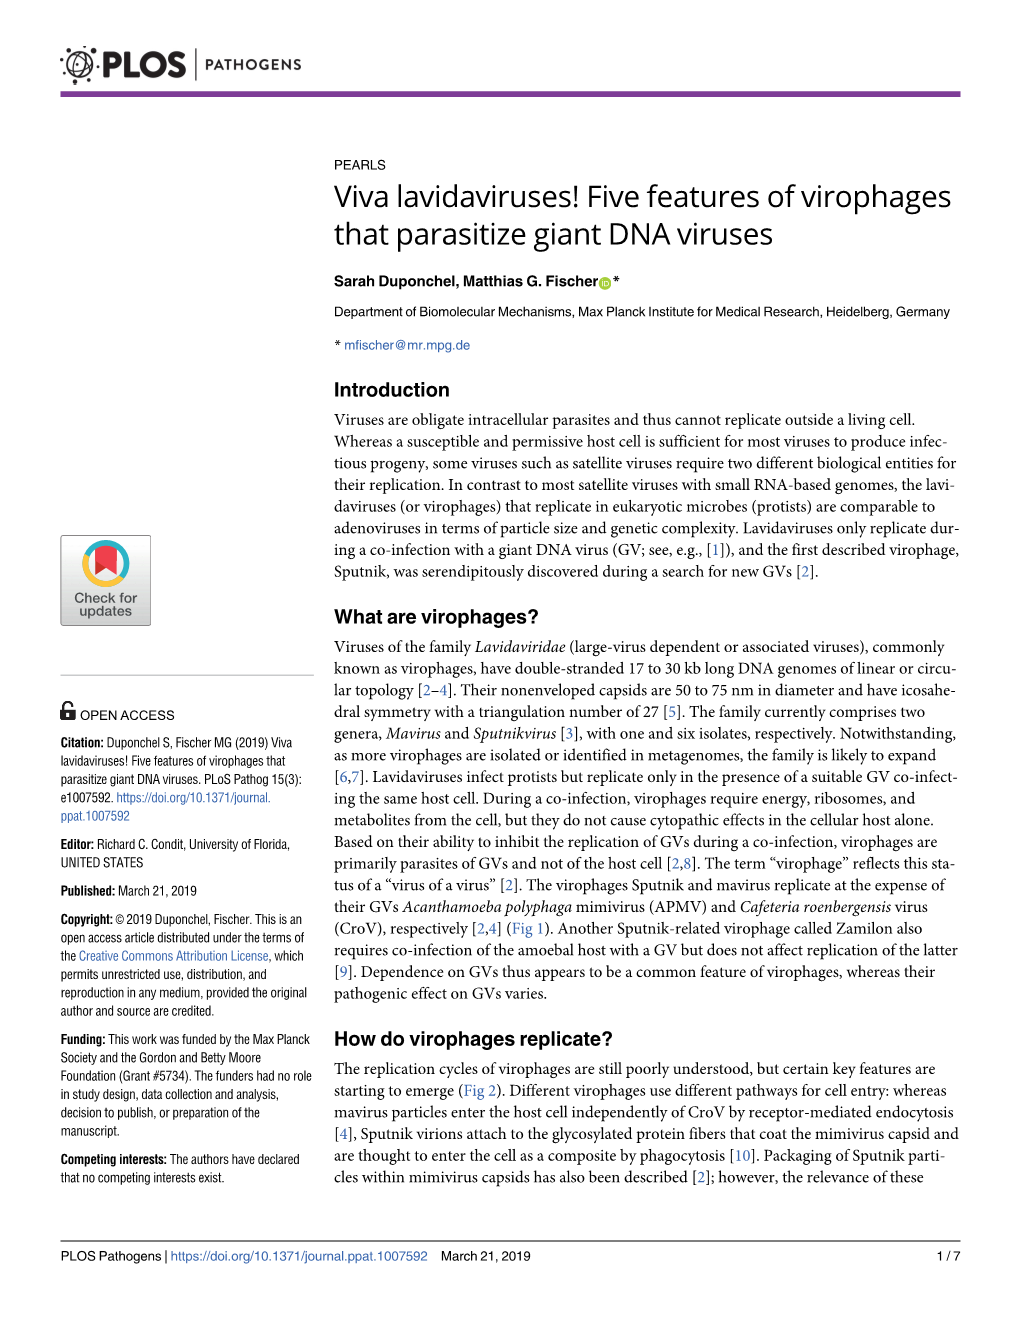 Five Features of Virophages That Parasitize Giant DNA Viruses